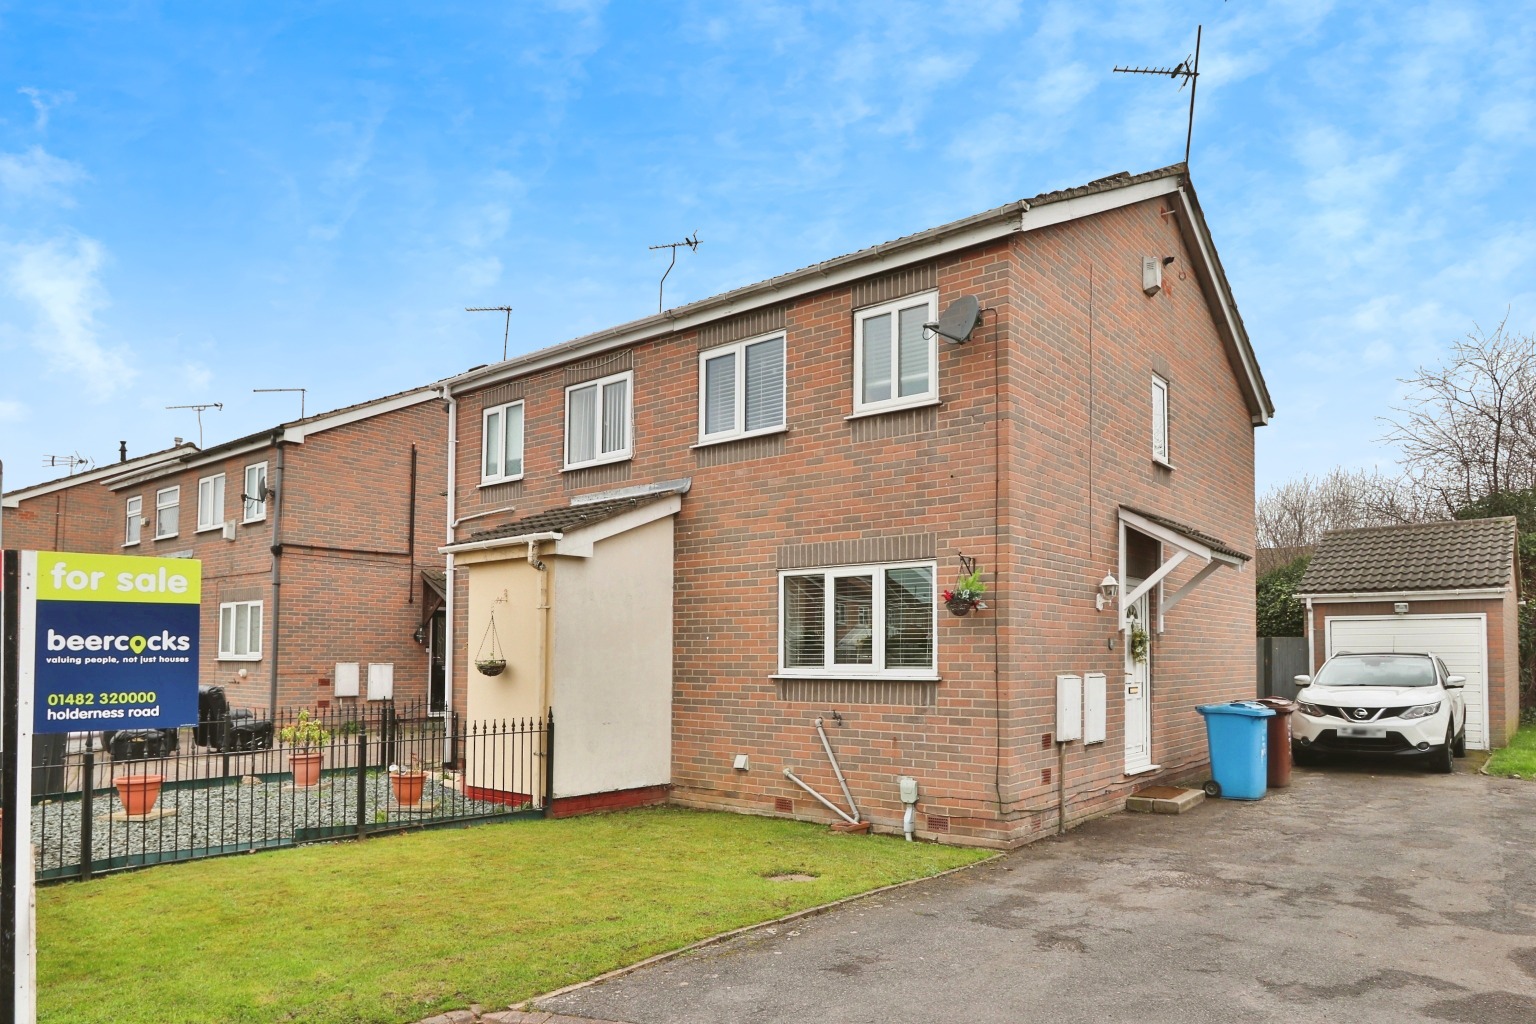 2 bed semi-detached house for sale in Swainby Close, Hull - Property Image 1